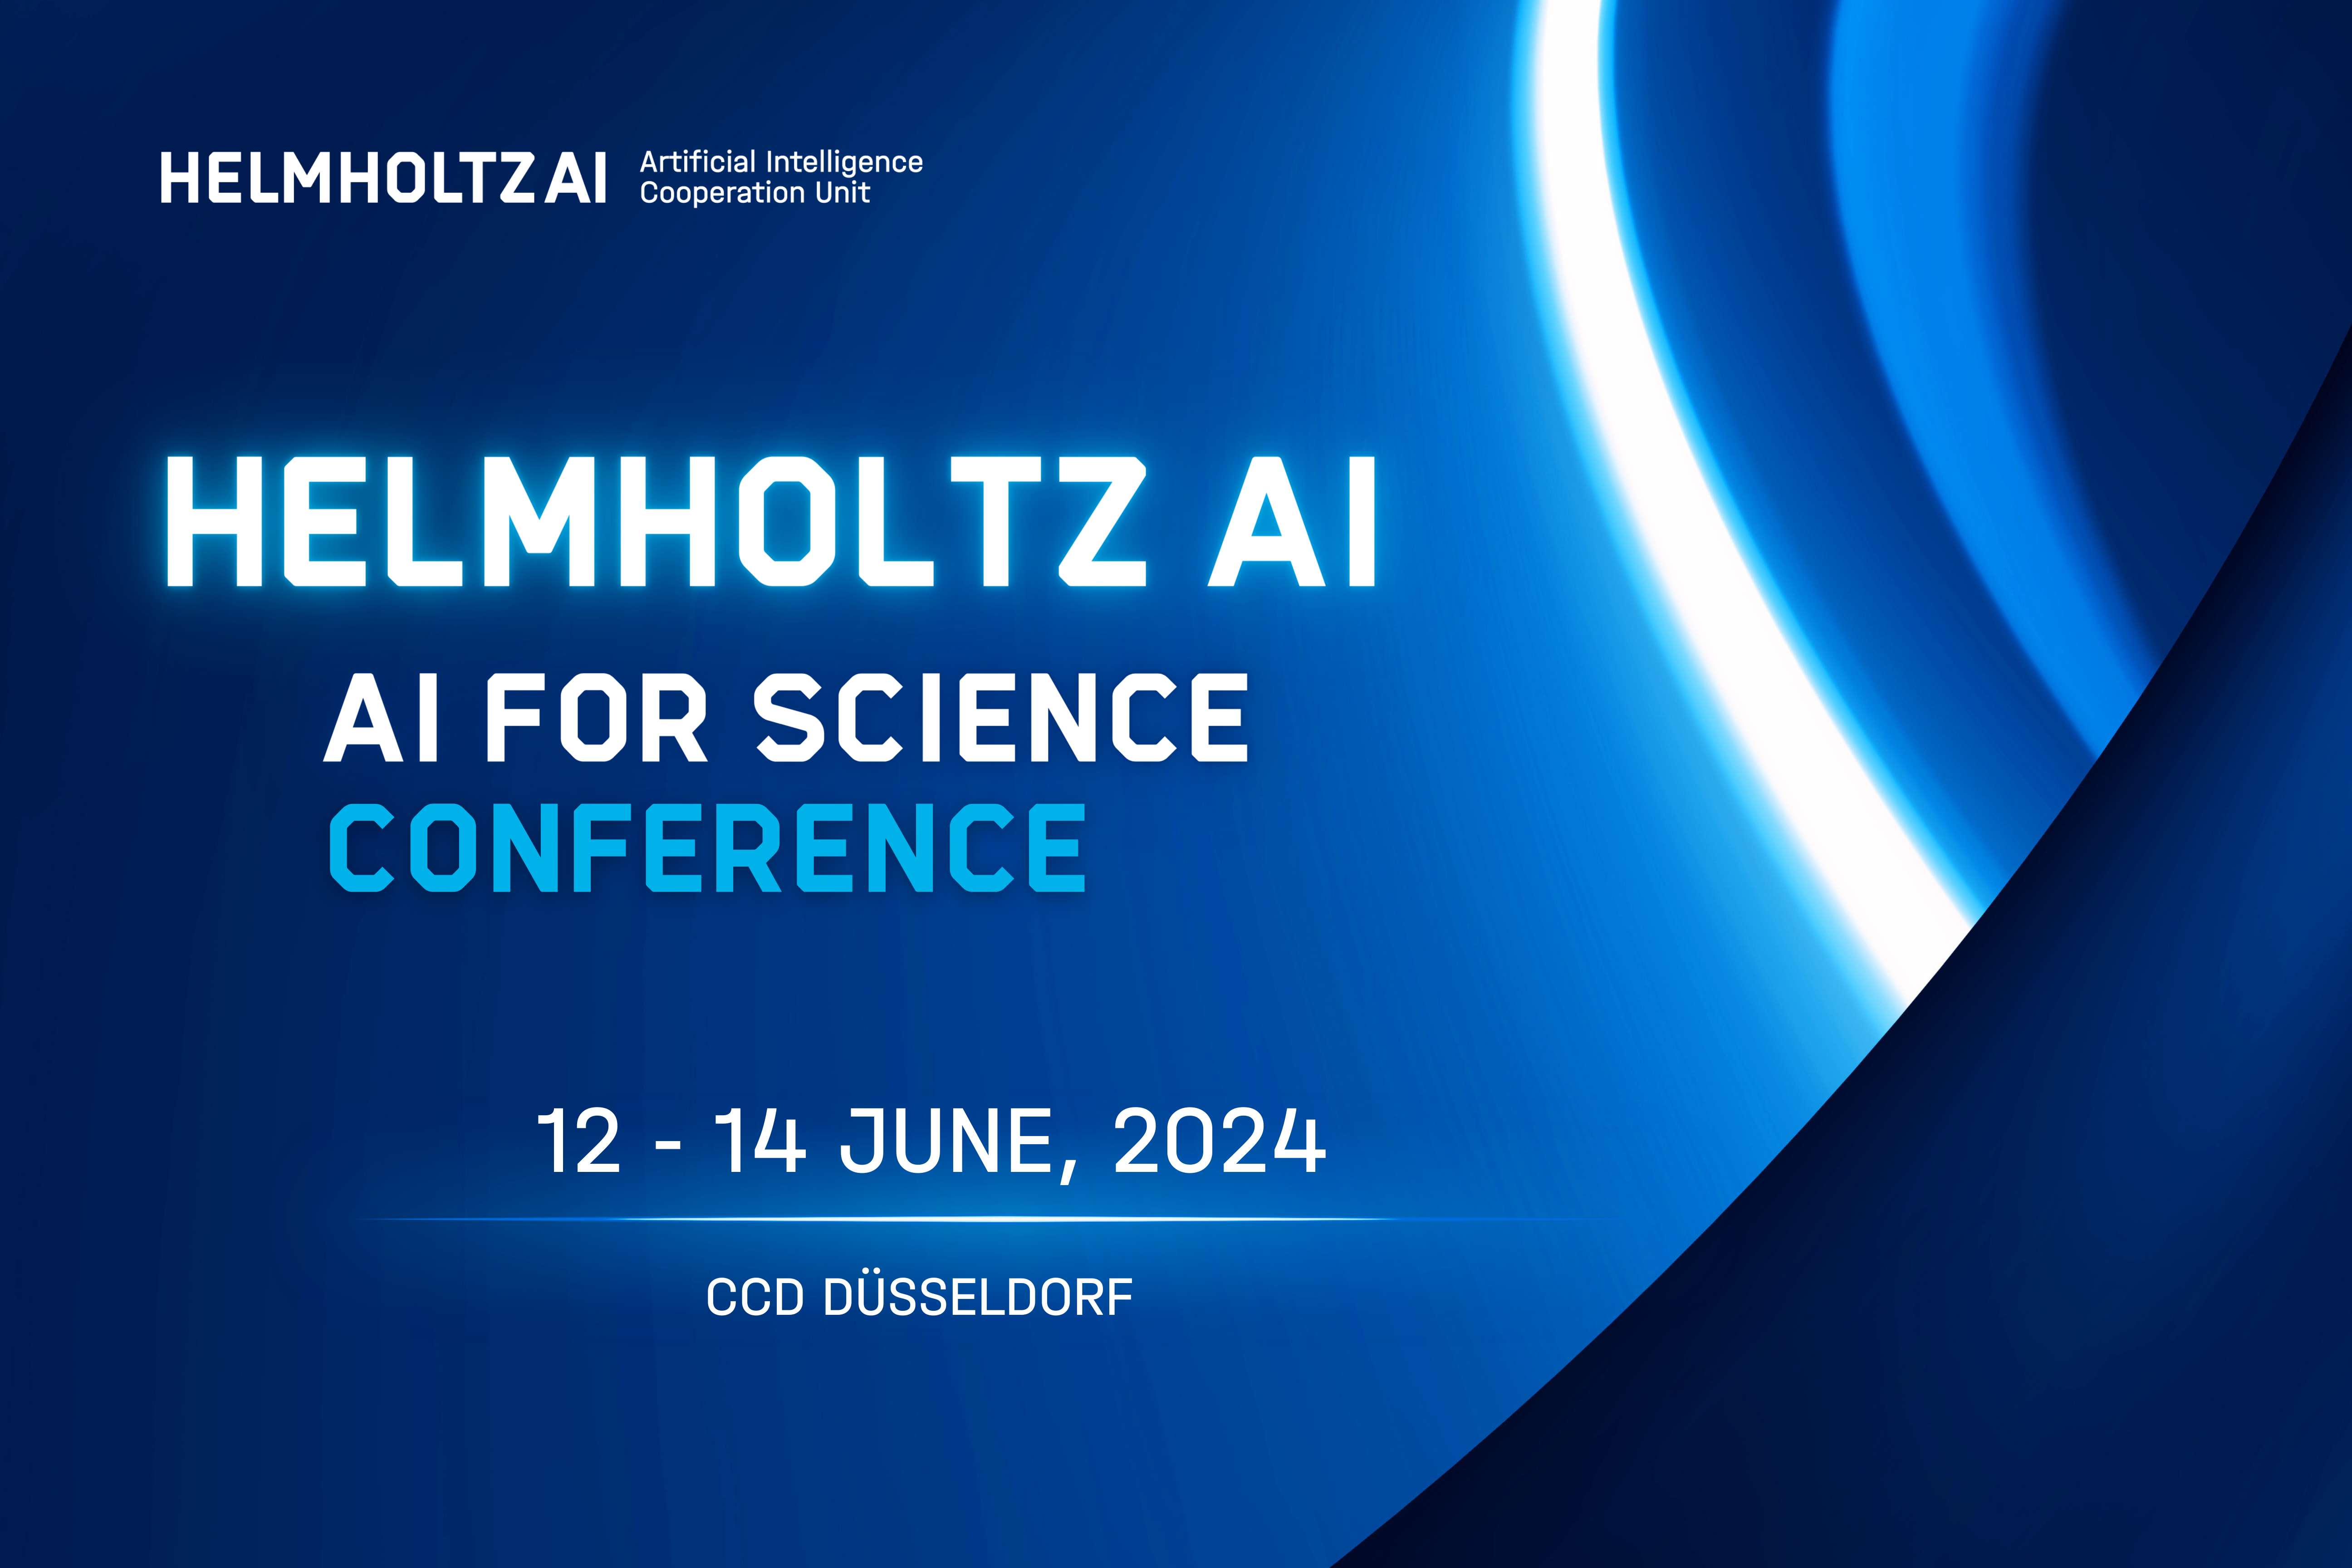 Registration for the Helmholtz AI Conference is now open!